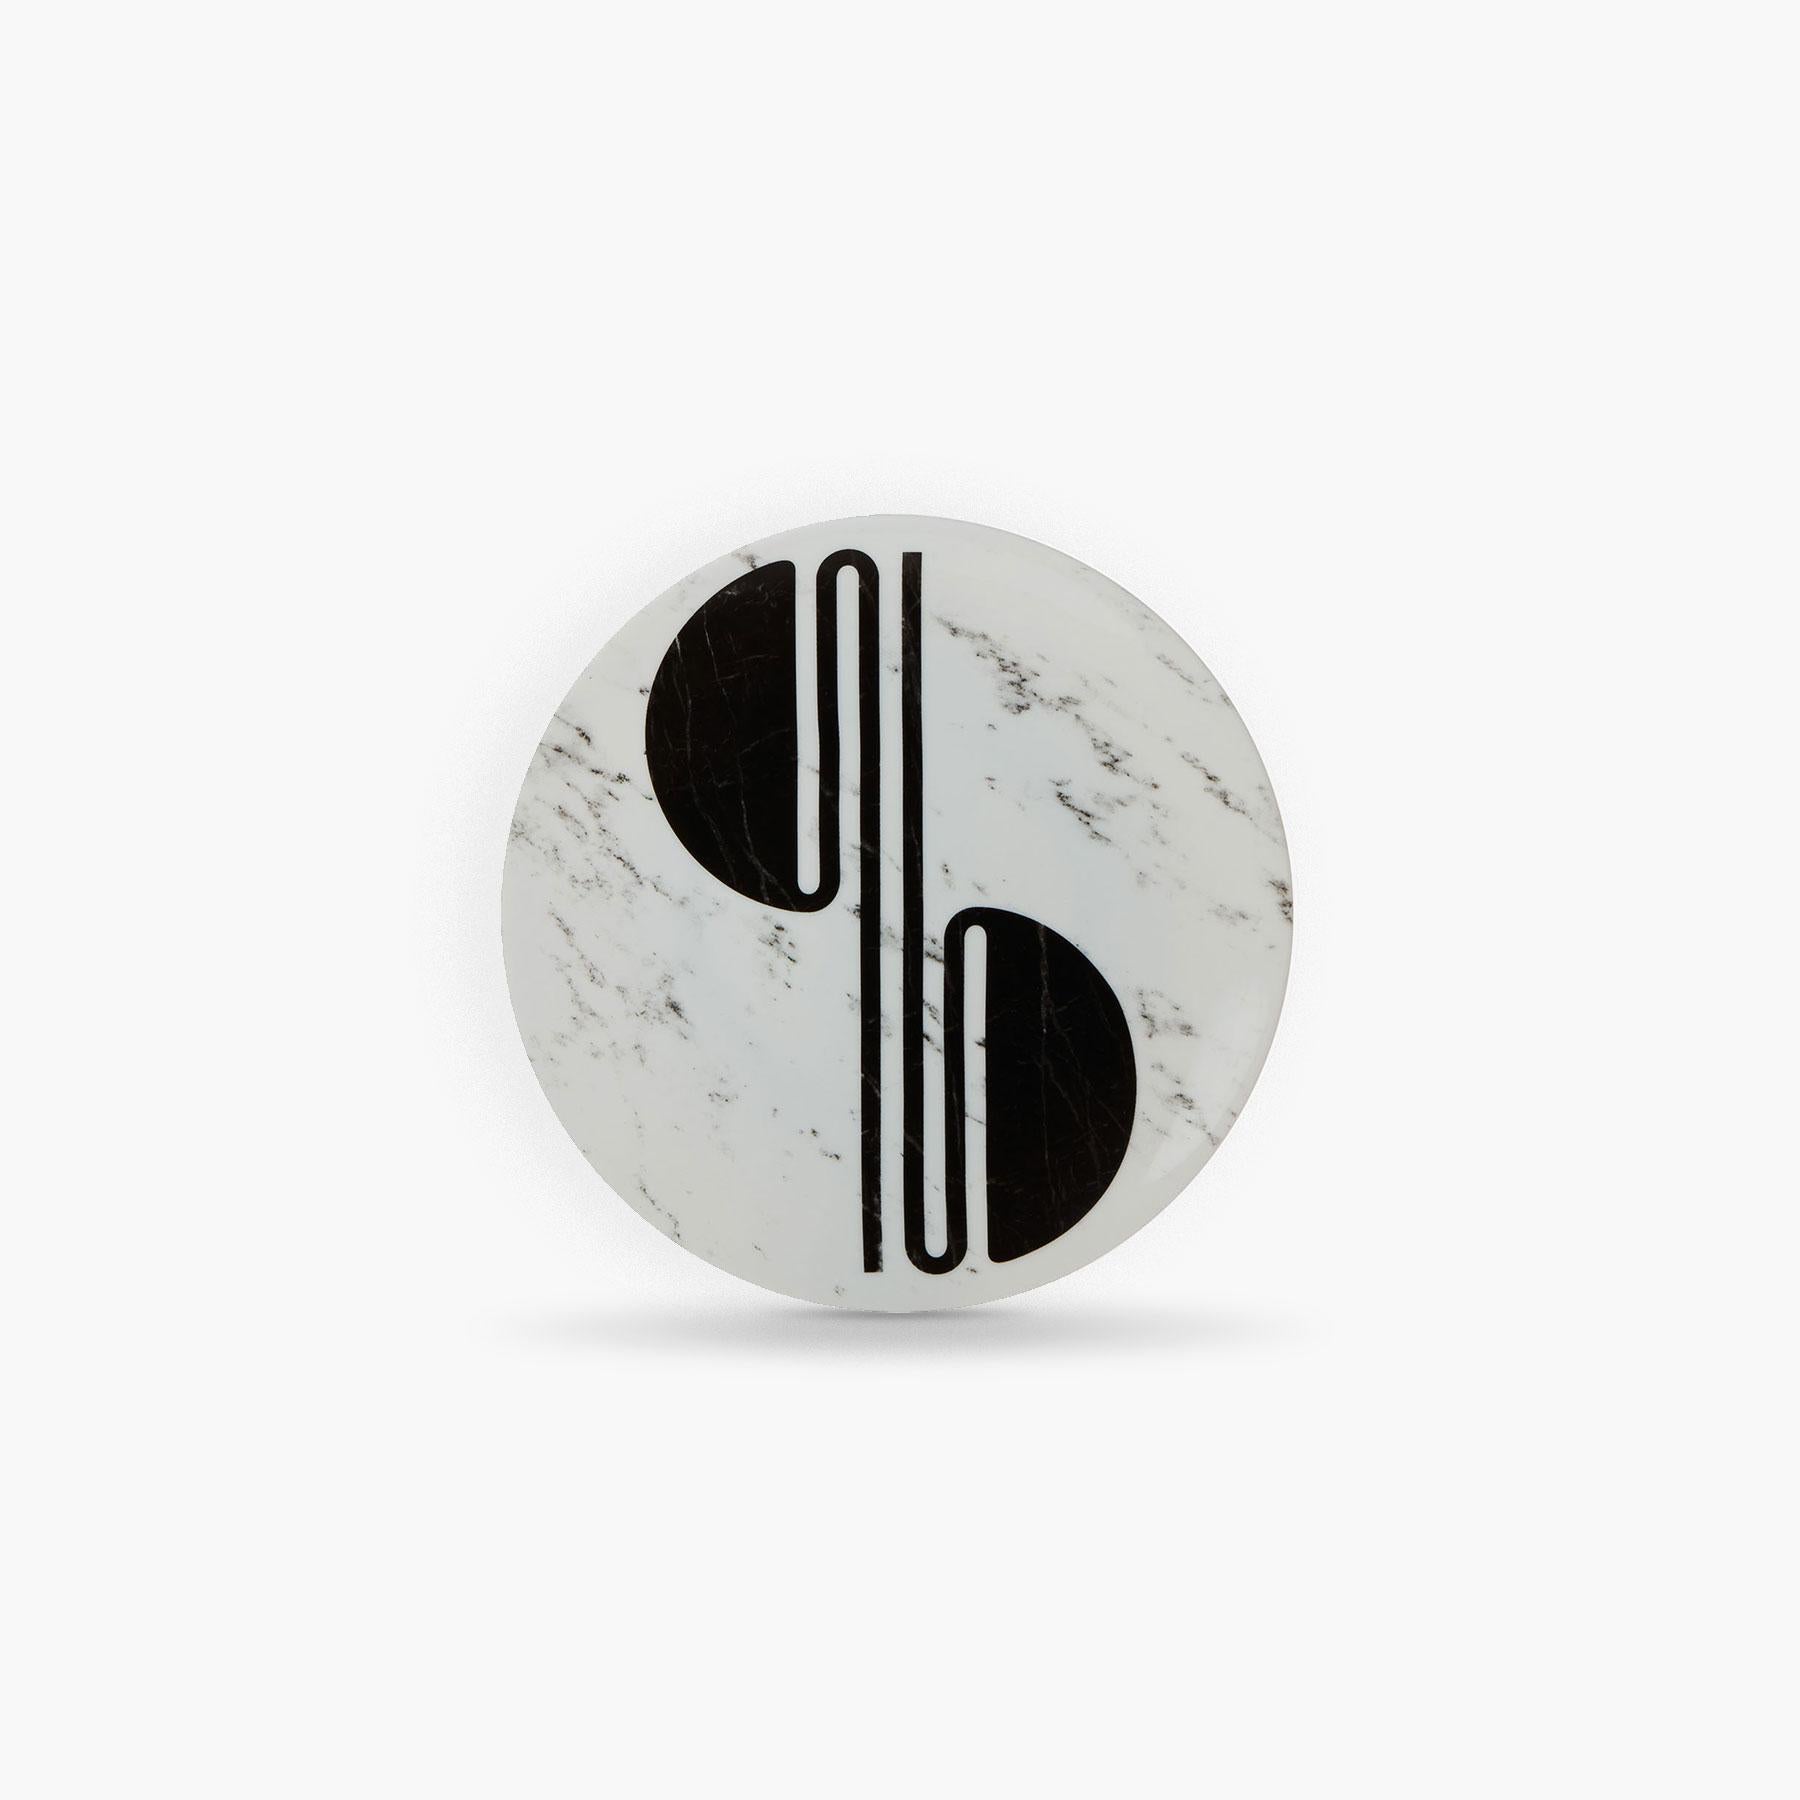 
Etienne Bardelli, plastic artist, interprets in his own way the architecture of Rue de Paradis: A sweet mix between the 1930s and the 1970s.

Porcelain of Limoges extra fine.
Black and white serigraphy.
Diameter: 16 cm 
Height: 1.4 cm
Weight: 0.208